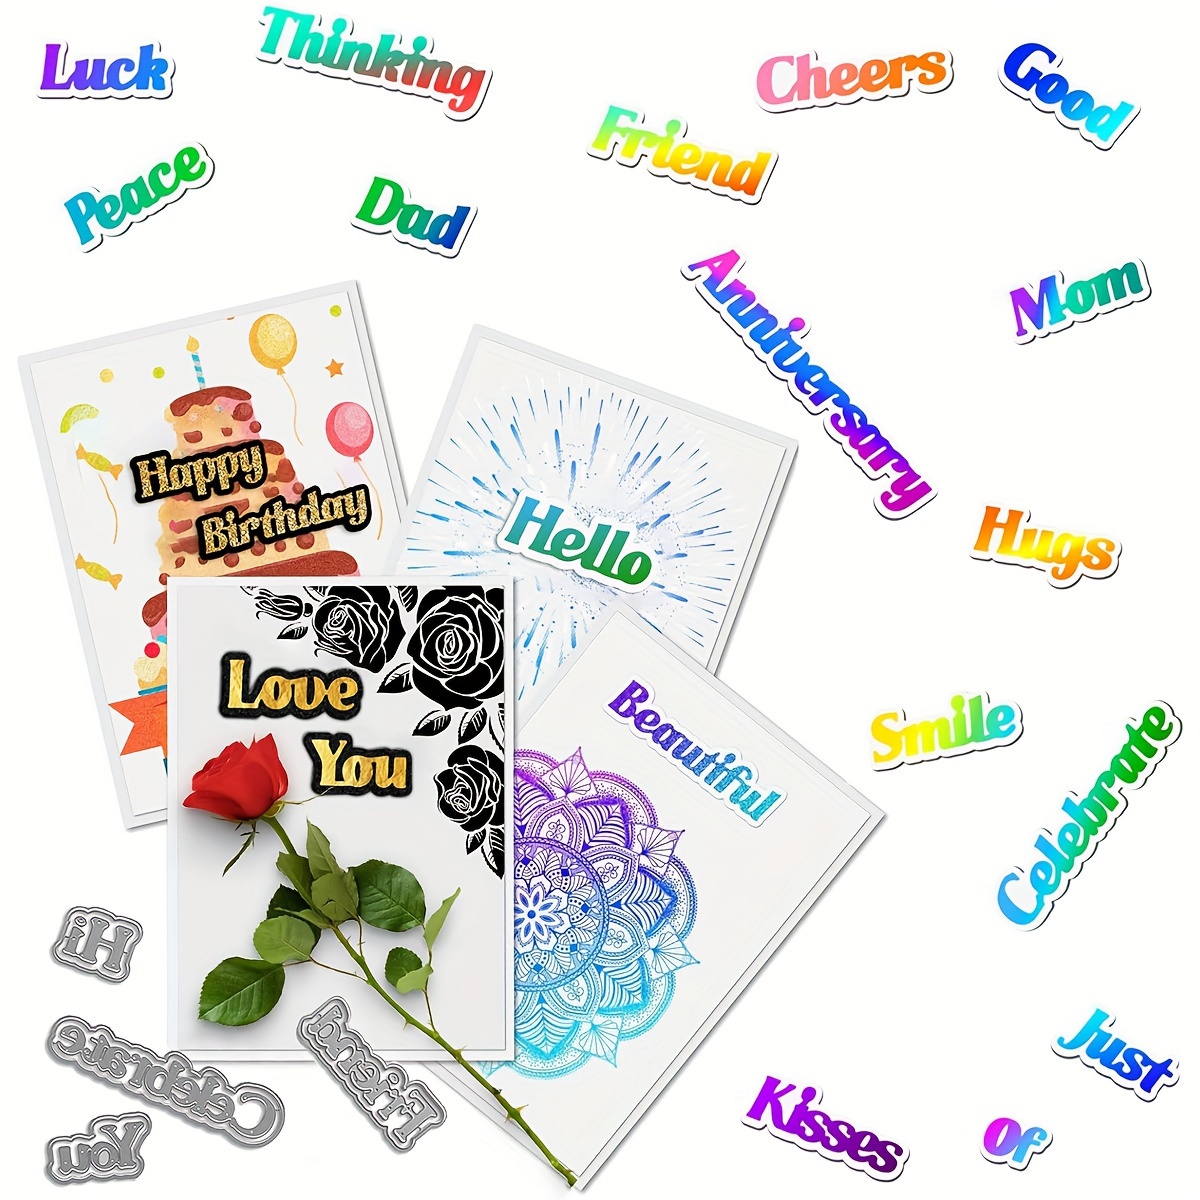 

27pcs, Sentiments Words Metal Die Cuts Shadow Words Cutting Dies Stencil Template For Anniversary Birthday Party Diy Craft Scrapbooking Card Making